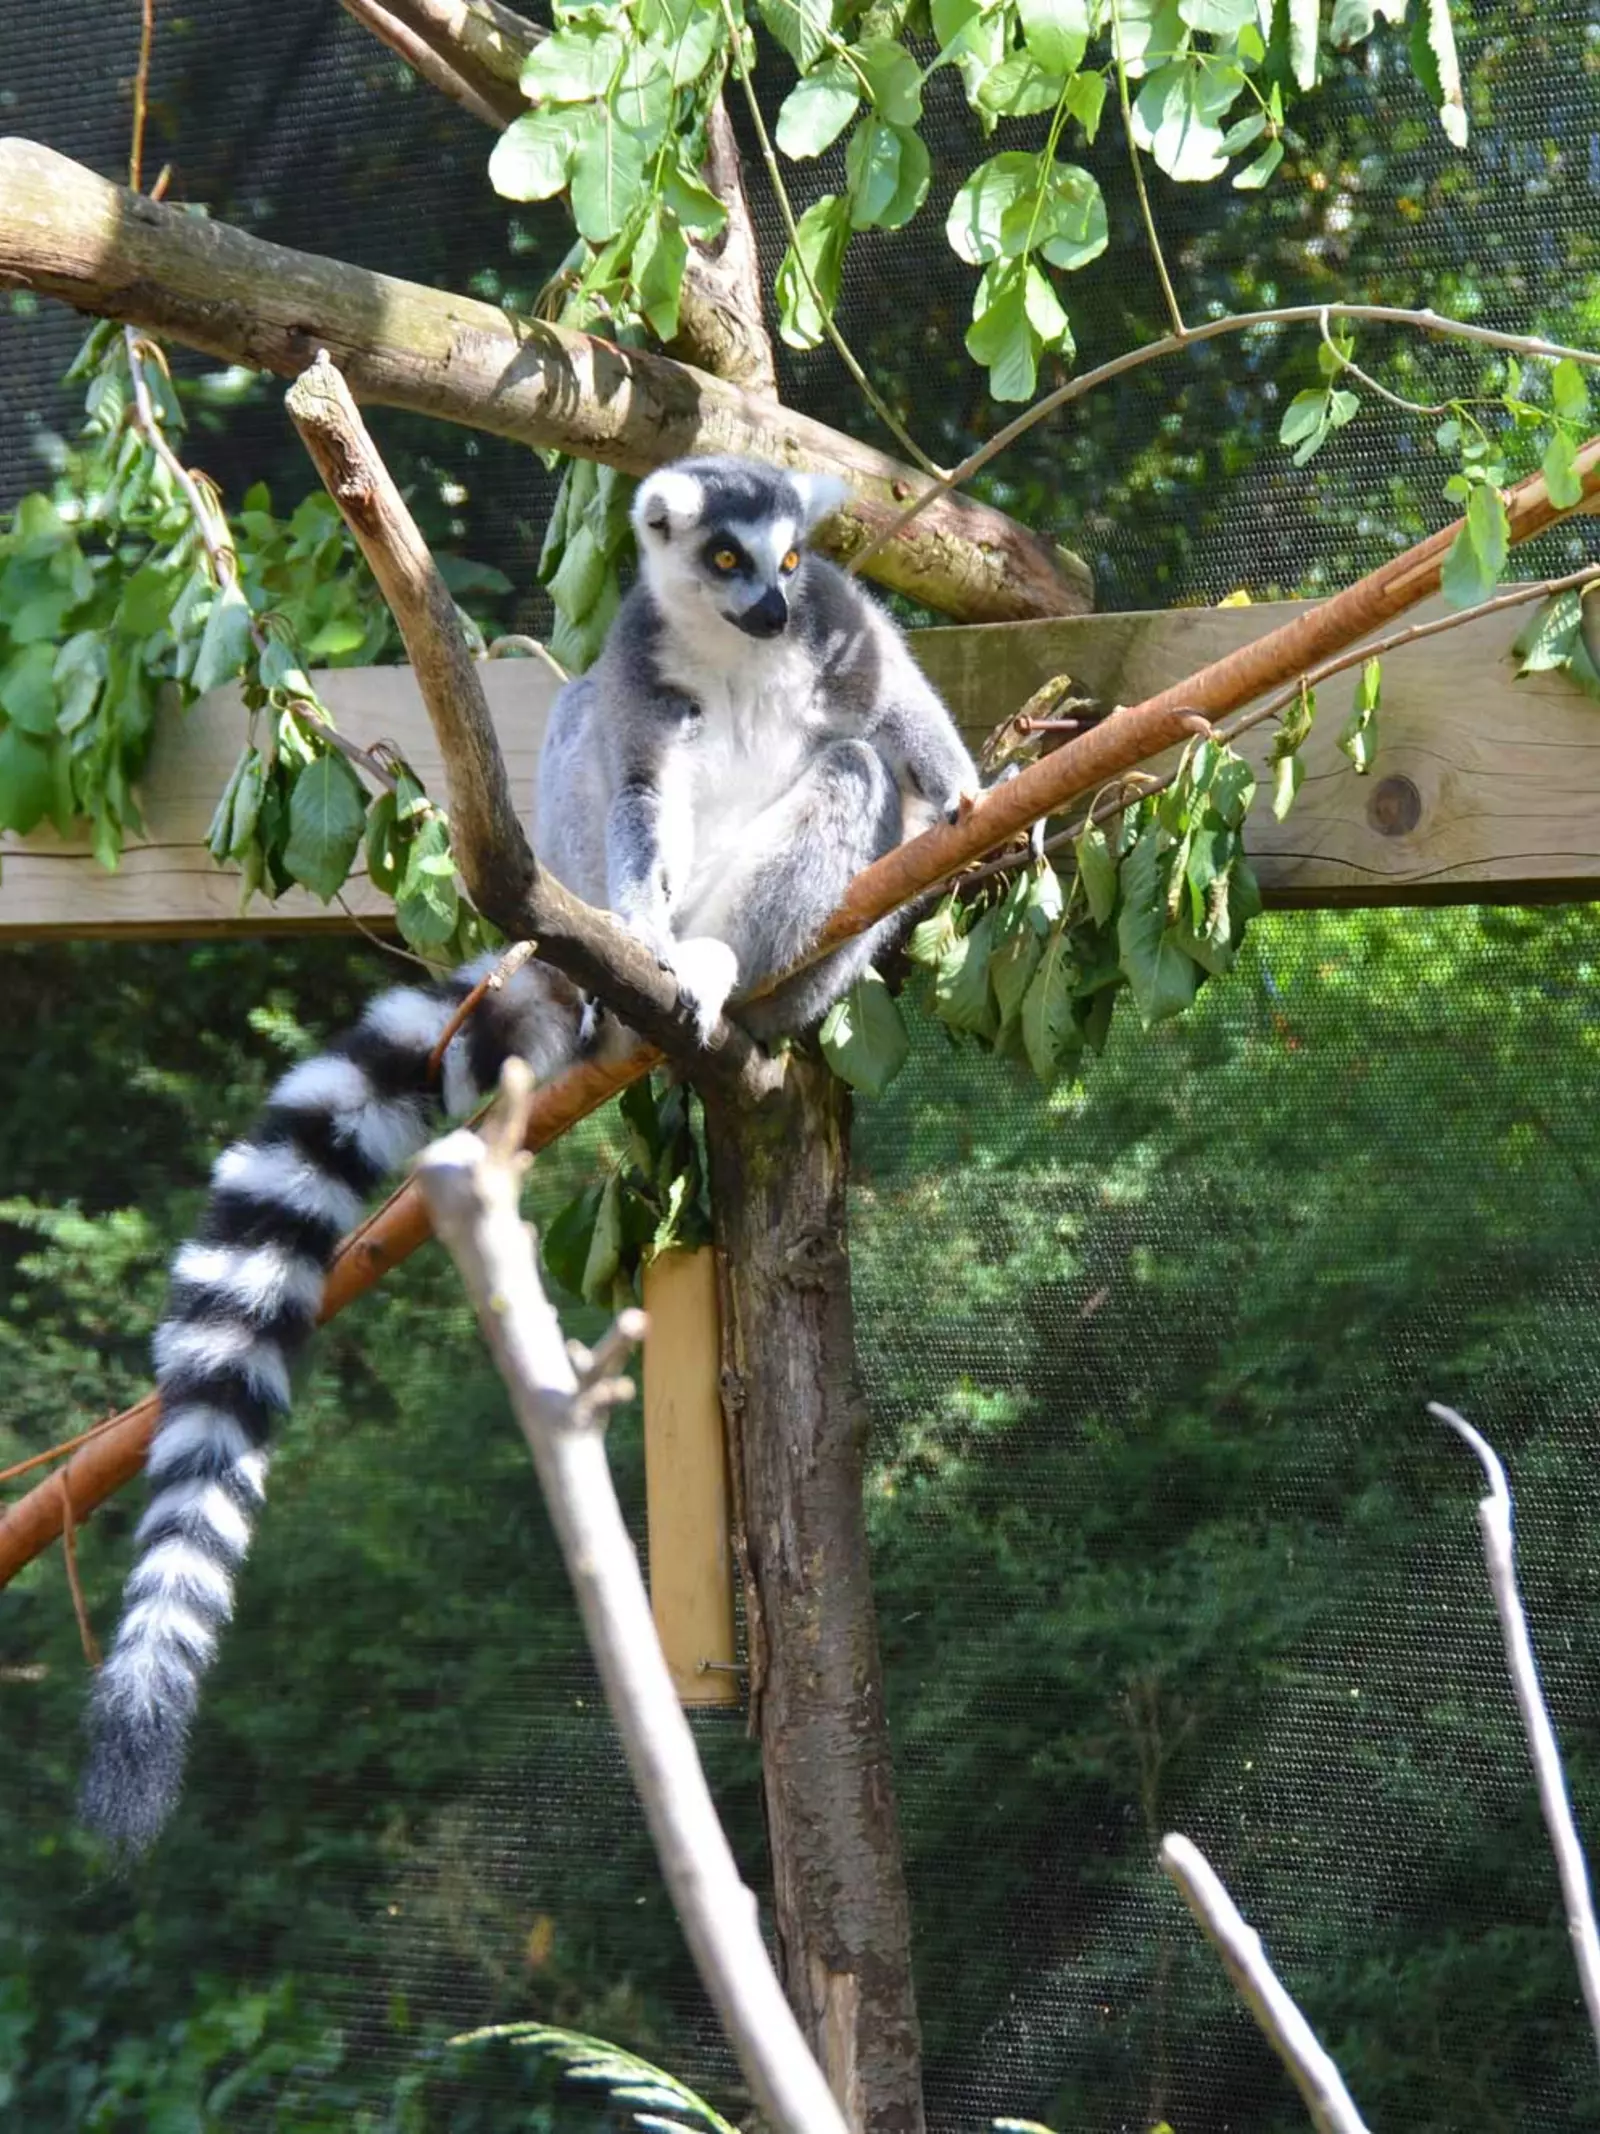 Lemur at London Zoo sitting on a branch